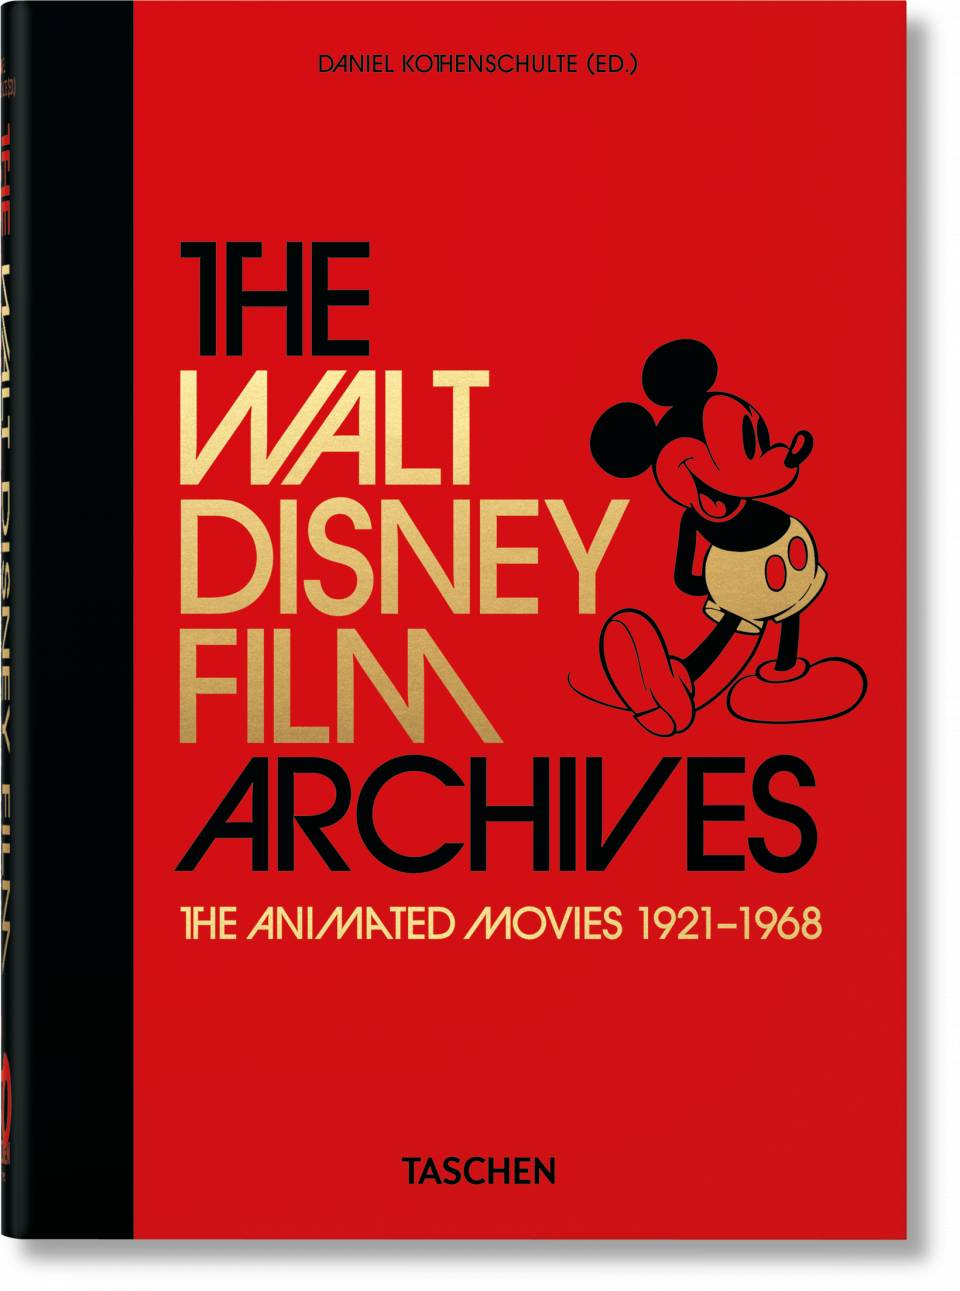 The Walt Disney Film Archives. The Animated Movies 1921–1968 40th Edition